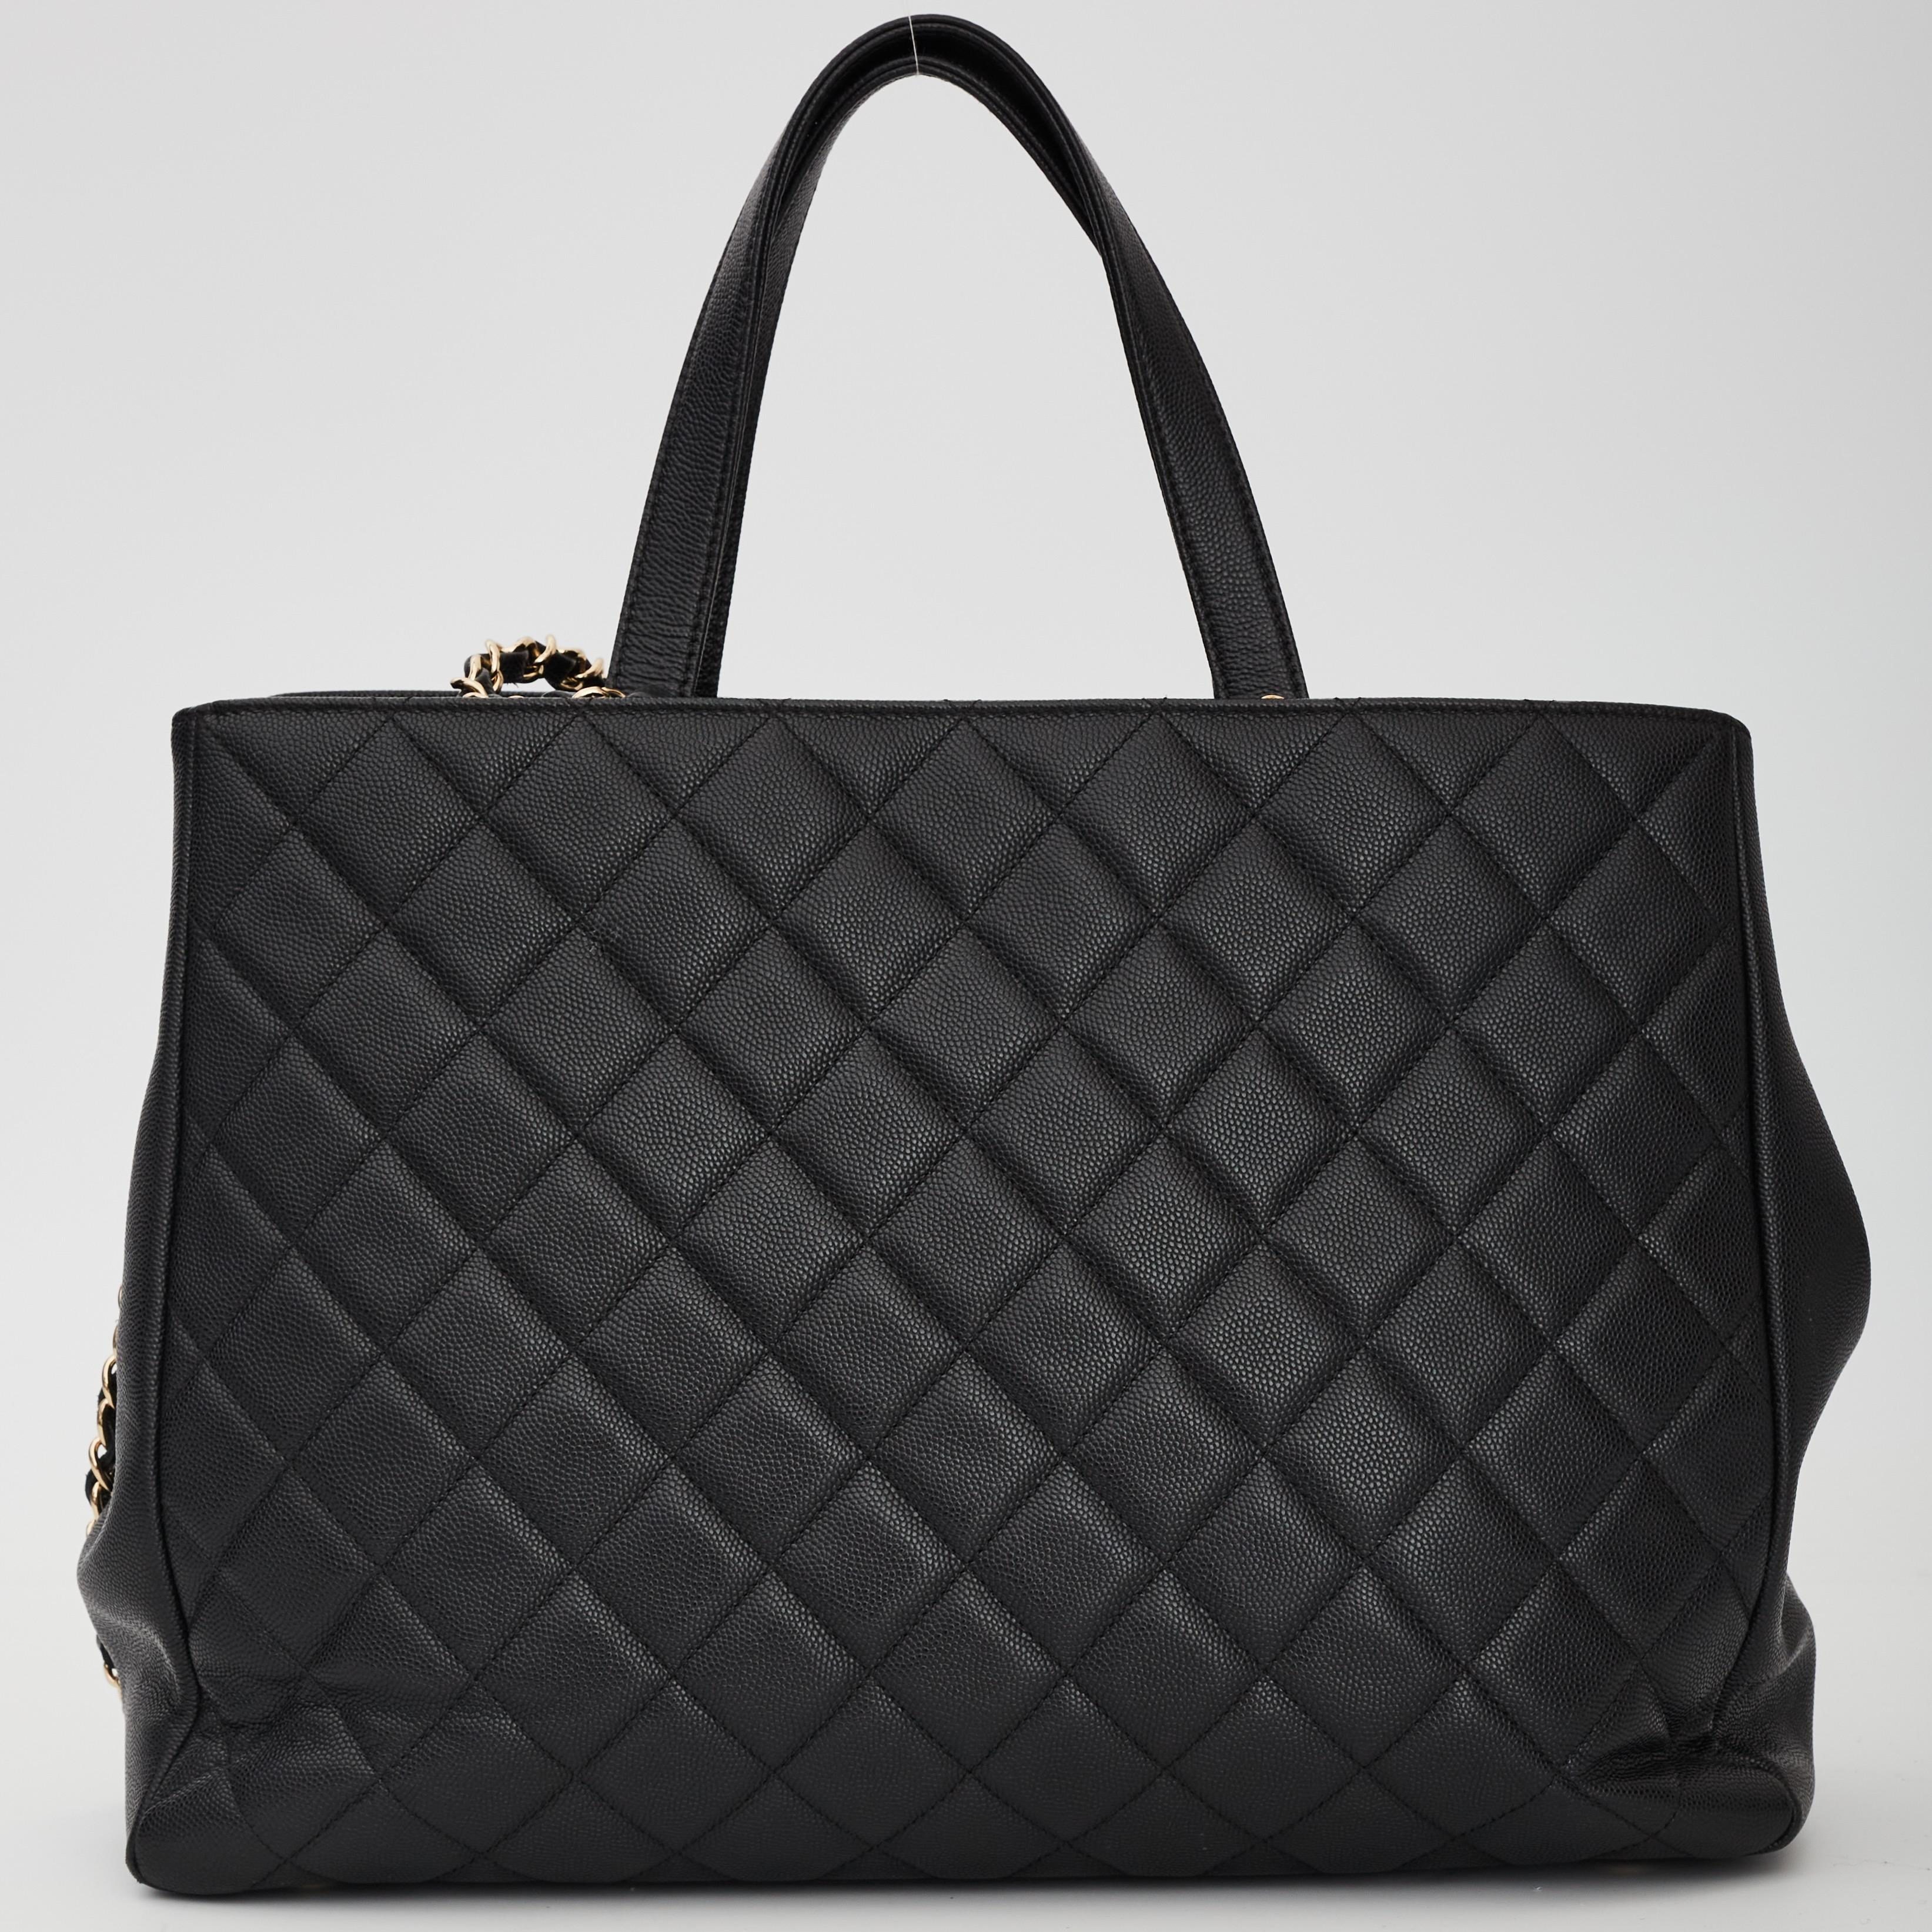 This Chanel shopping tote style bag is made of durable caviar leather in black. The bag features gold hard ware, dual flat leather top handles, an optional shoulder strap, a front CC twist lock closure, a quilted front zip pocket, an open top and a